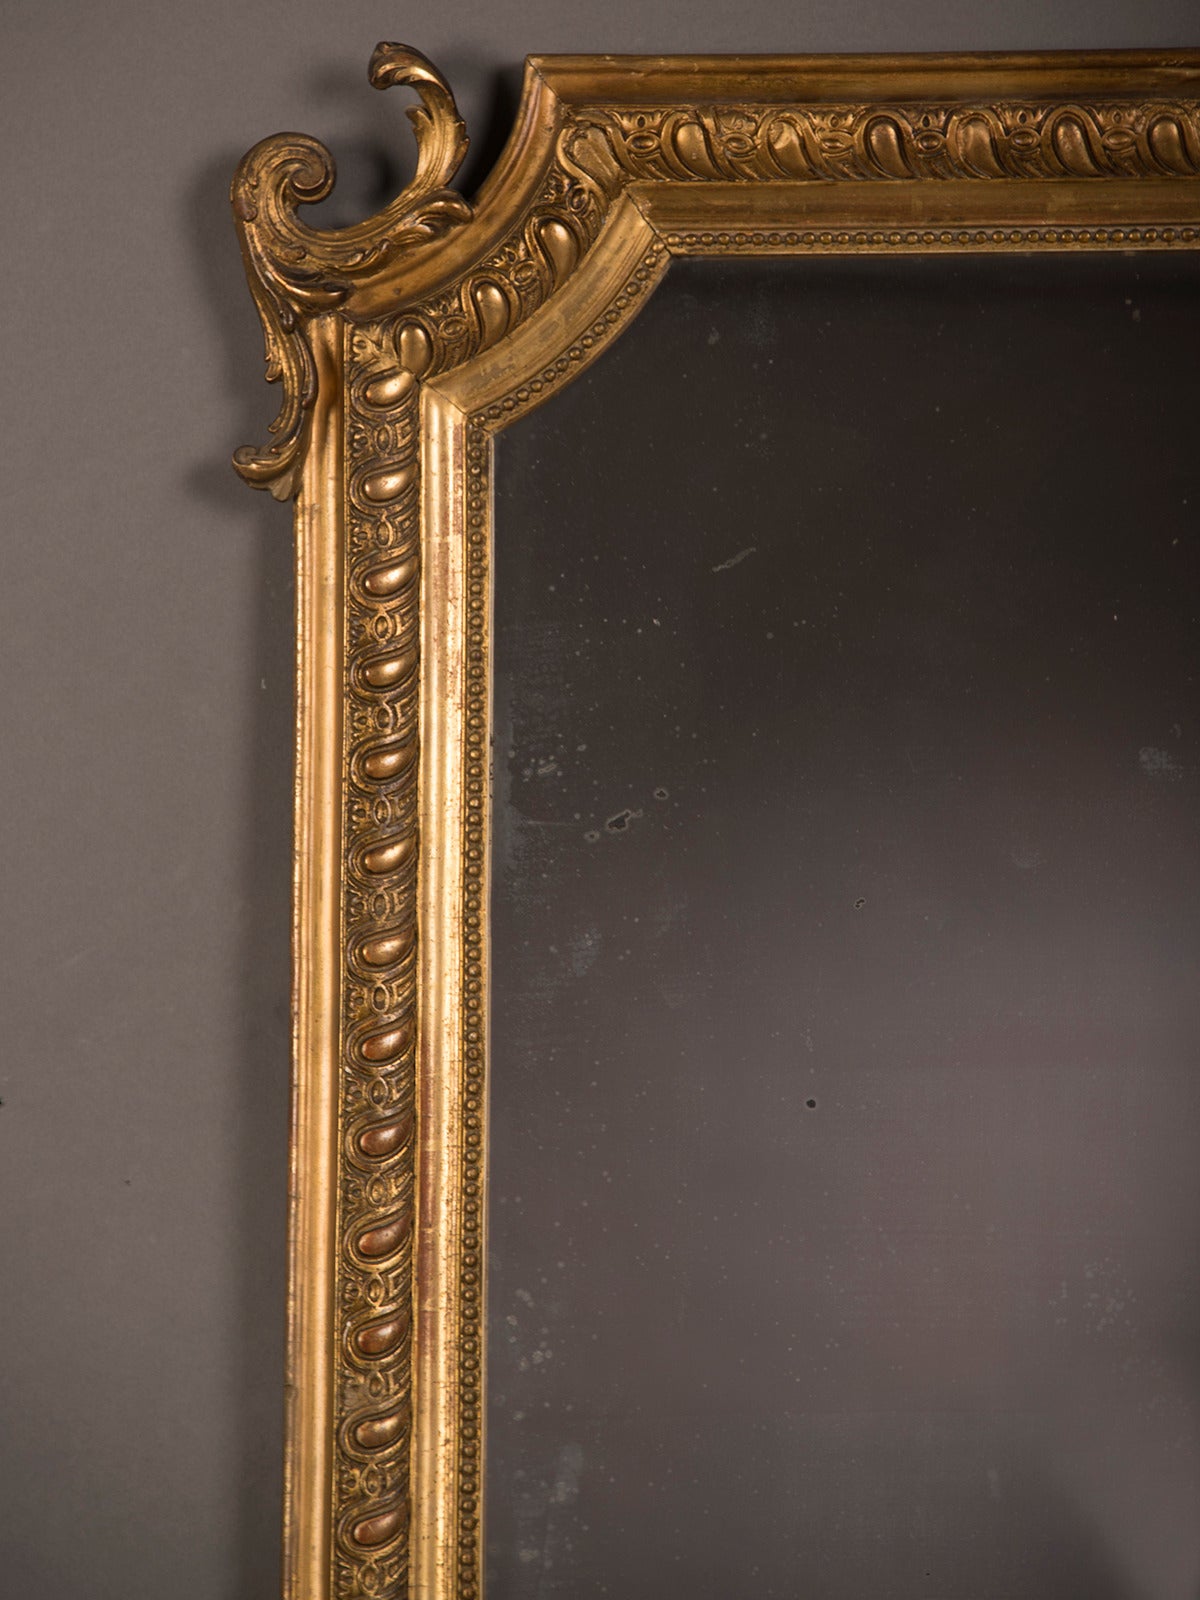 A handsome Louis Philippe style gold leaf framed mirror from France circa 1875 enclosing the antique mirror glass plate. Please notice the attractive symmetry of the decorative pattern evident in this frame. The teardrop shapes are smooth in